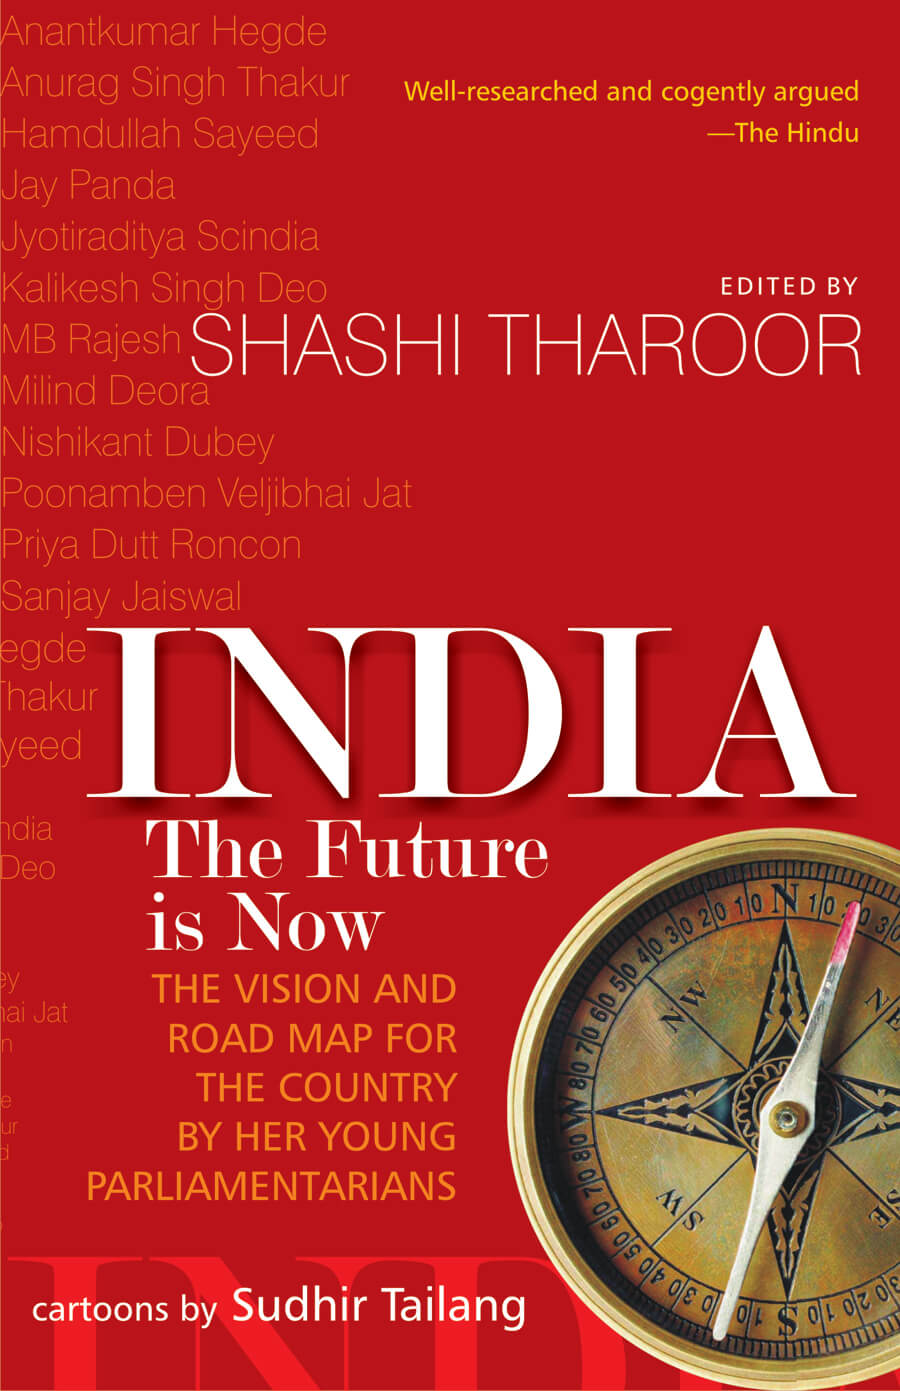 India-The Future Is Now: The Vision And Road Map For The Country By Her Young Parliamentarians